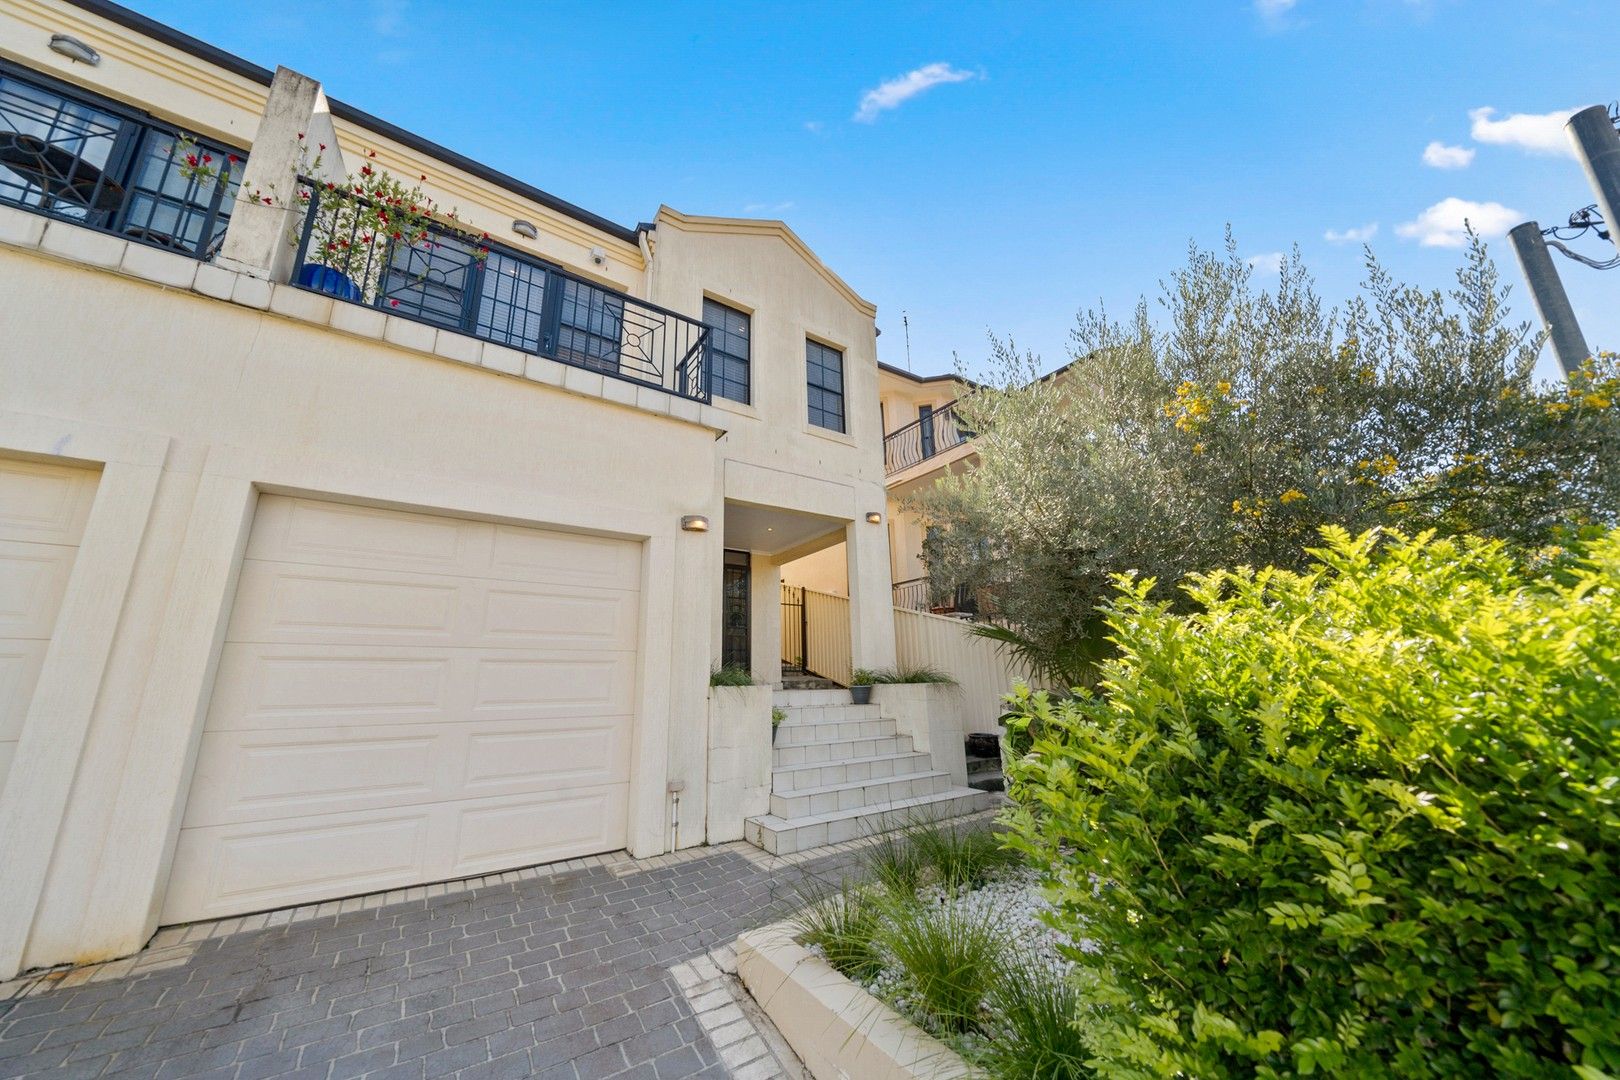 2/22 Balmoral Crescent, Georges Hall NSW 2198, Image 0